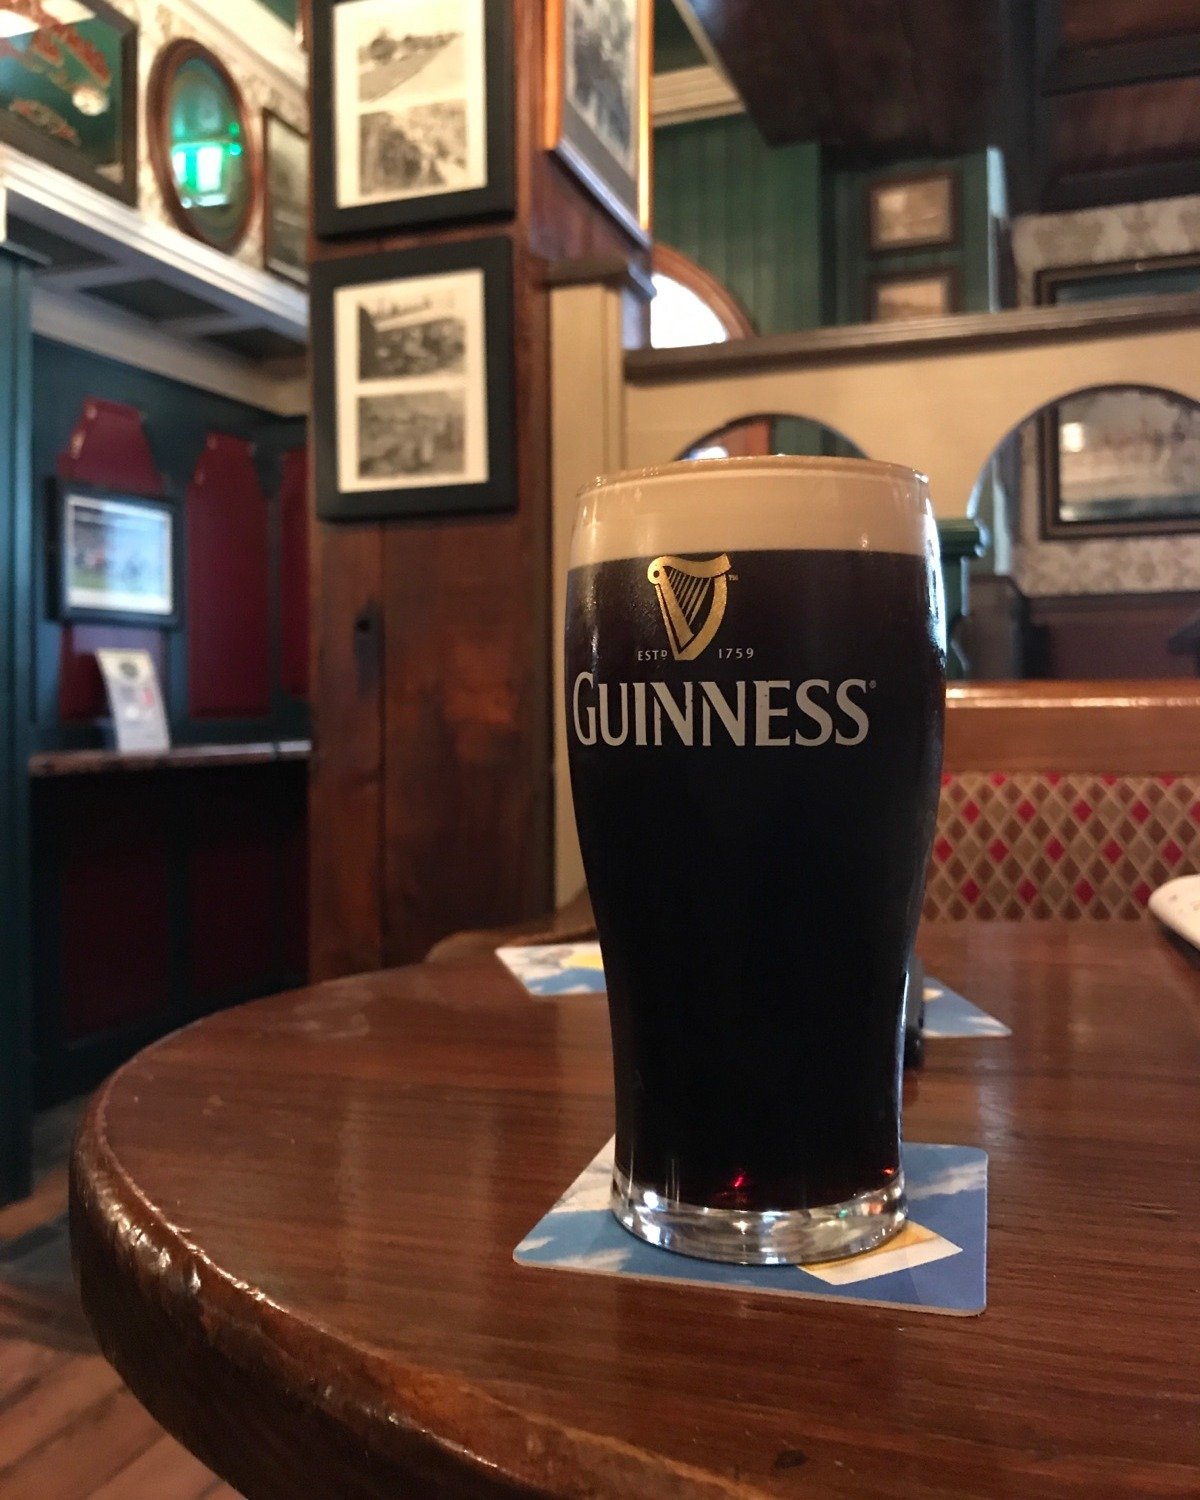 Nothing beats the simple pleasure of a classic Guinness pint, especially when it's savored in the cozy nooks of Molloy's. So here's to the moments that call for a pause, a pint, and a place that feels like home.